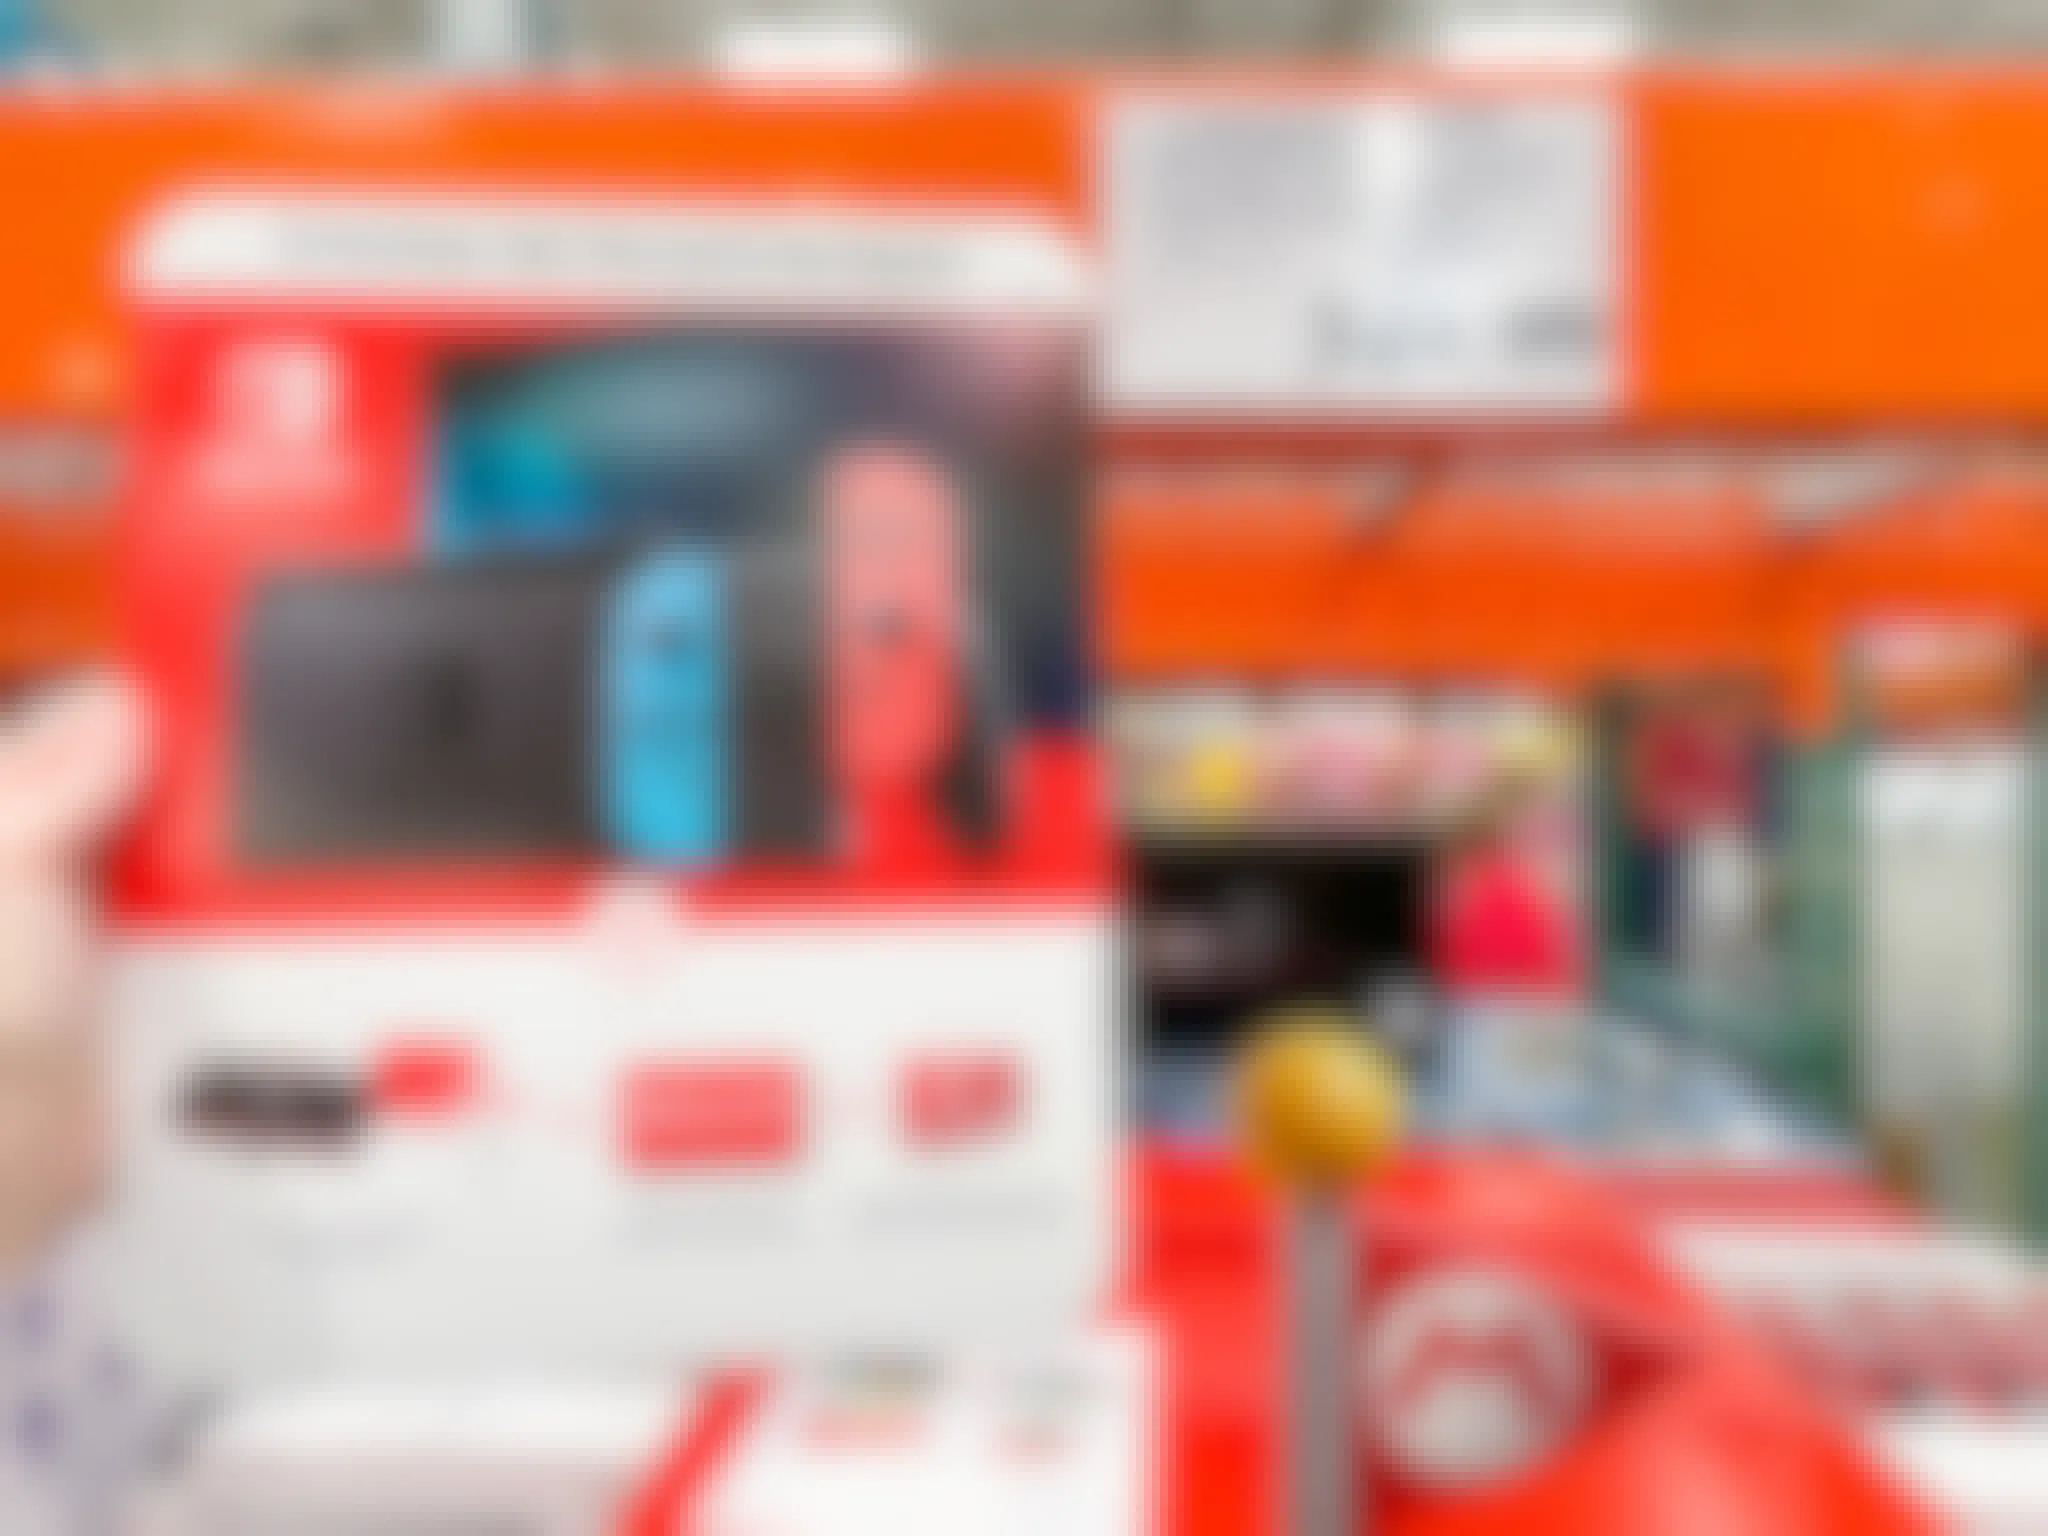 A Nintendo Switch Bundle being held up in front of the price sign at Costco.